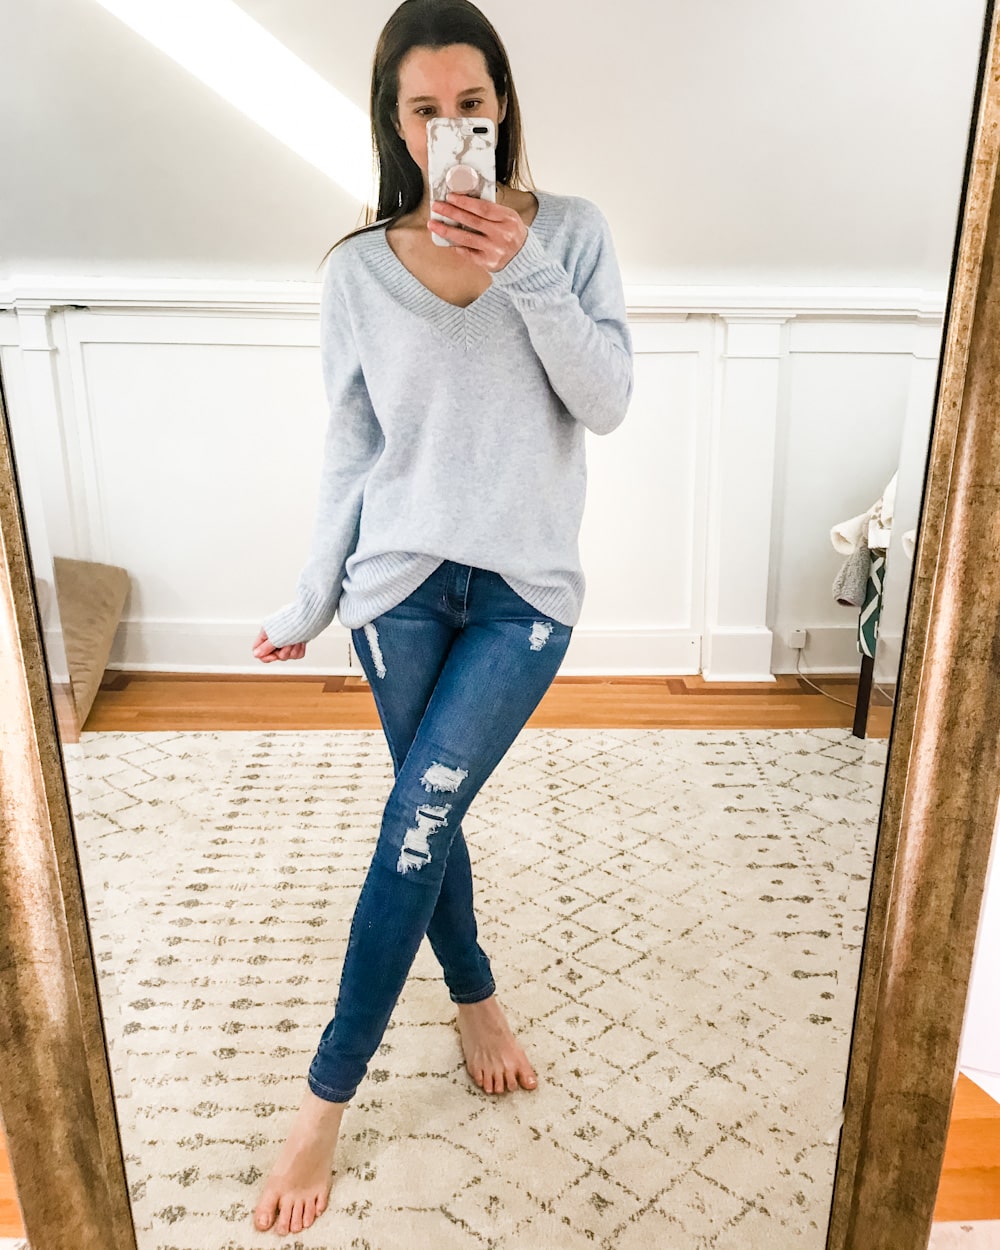 Amazon Goodthreads v-neck sweater worn by affordable fashion blogger Stephanie Ziajka of Diary of a Debutante